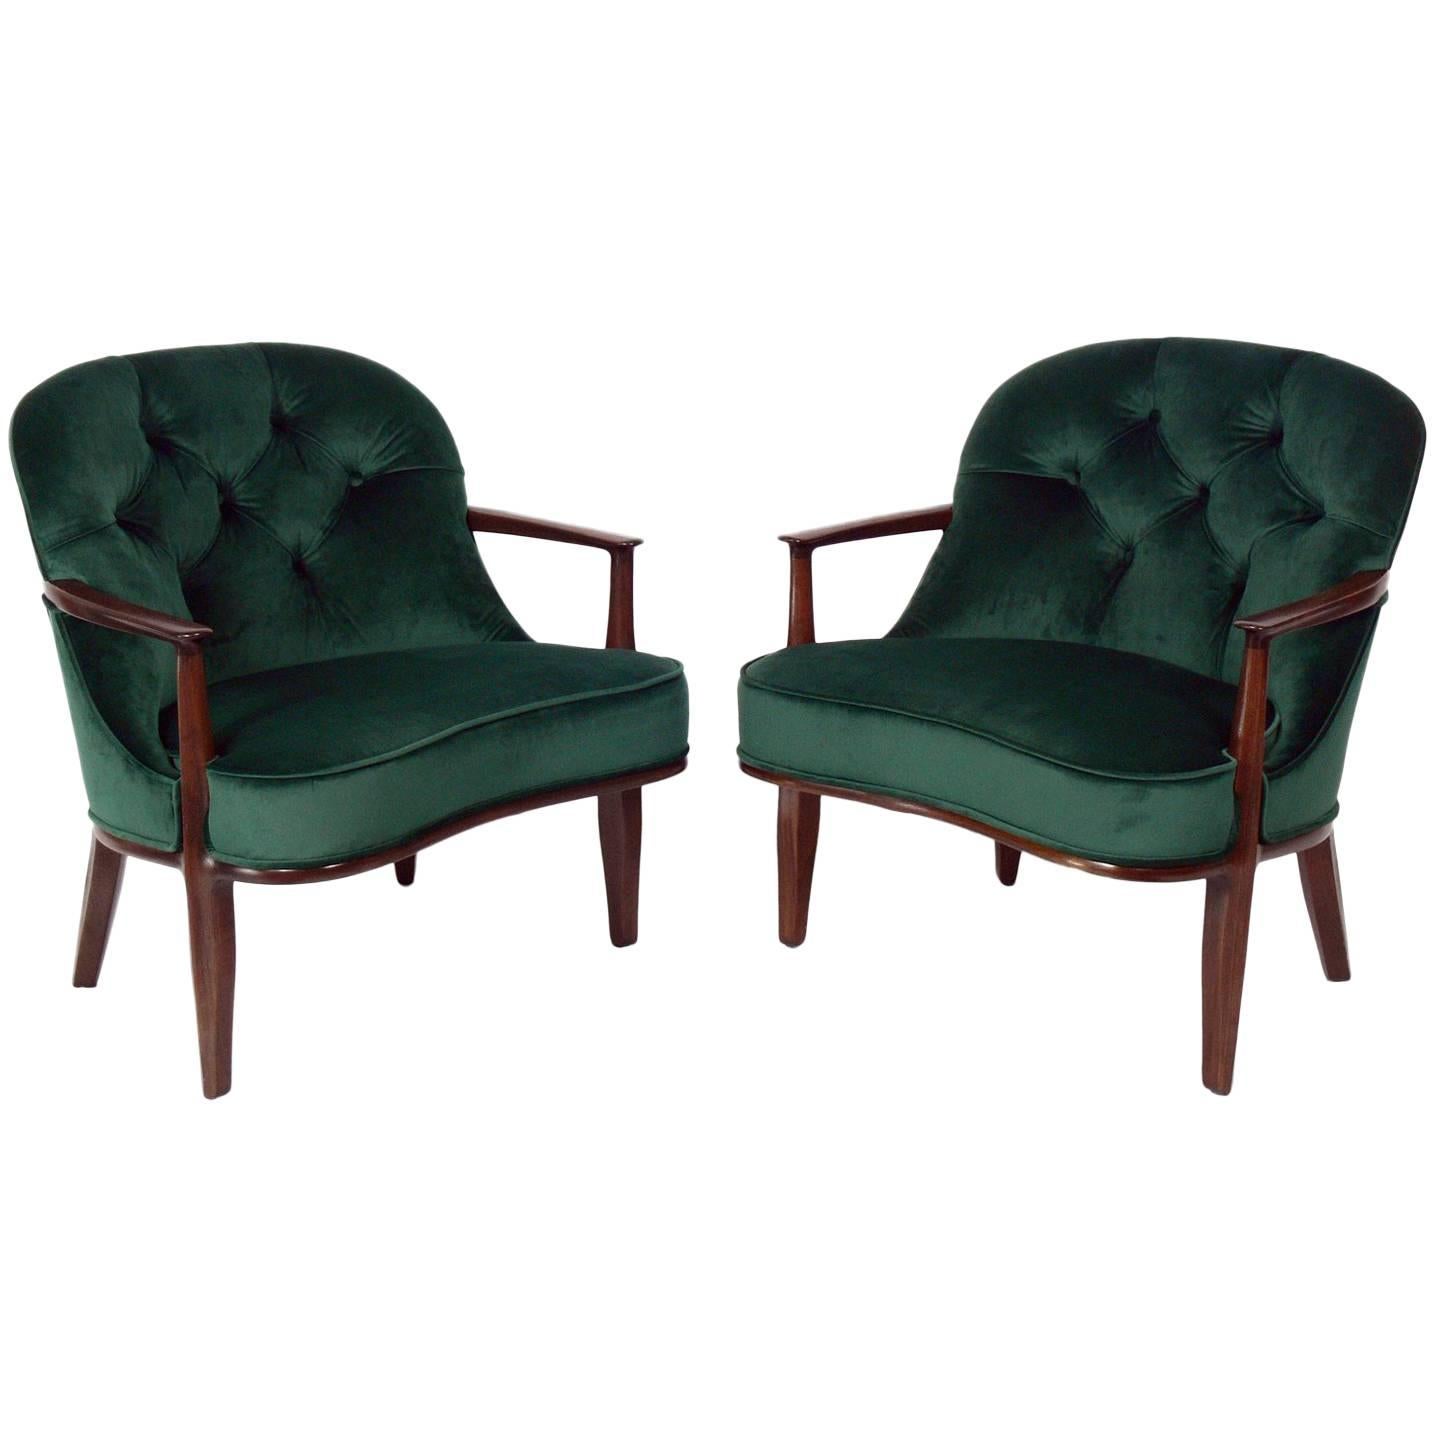 Pair of Tufted Lounge Chairs by Edward Wormley for Dunbar